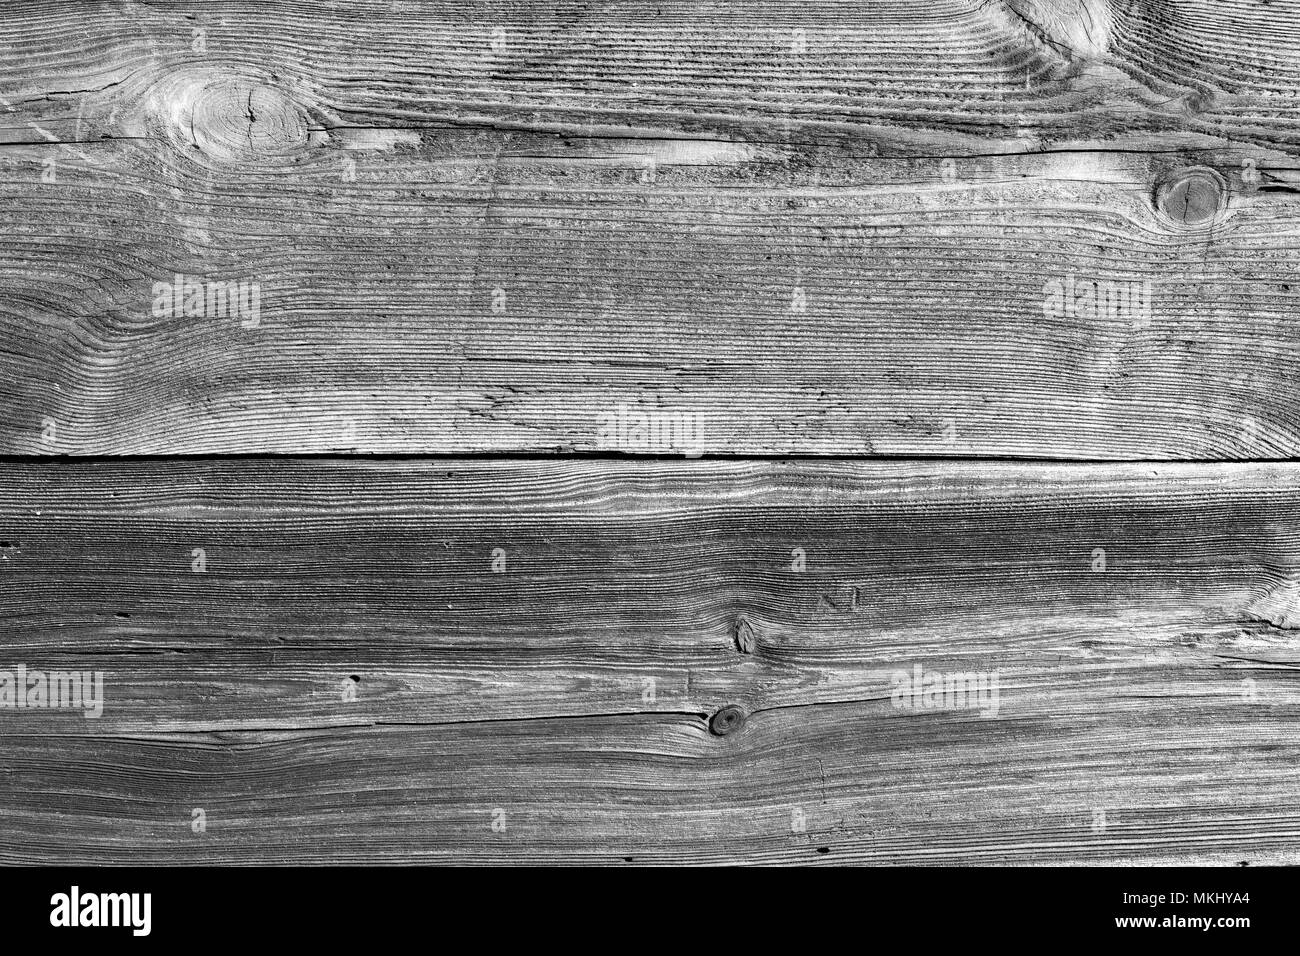 Old wood structure, wood pattern, plank, board. 200 years old wooden wall. Sharp, good visible growth rings, parallel lines and curves. Black & white. Stock Photo